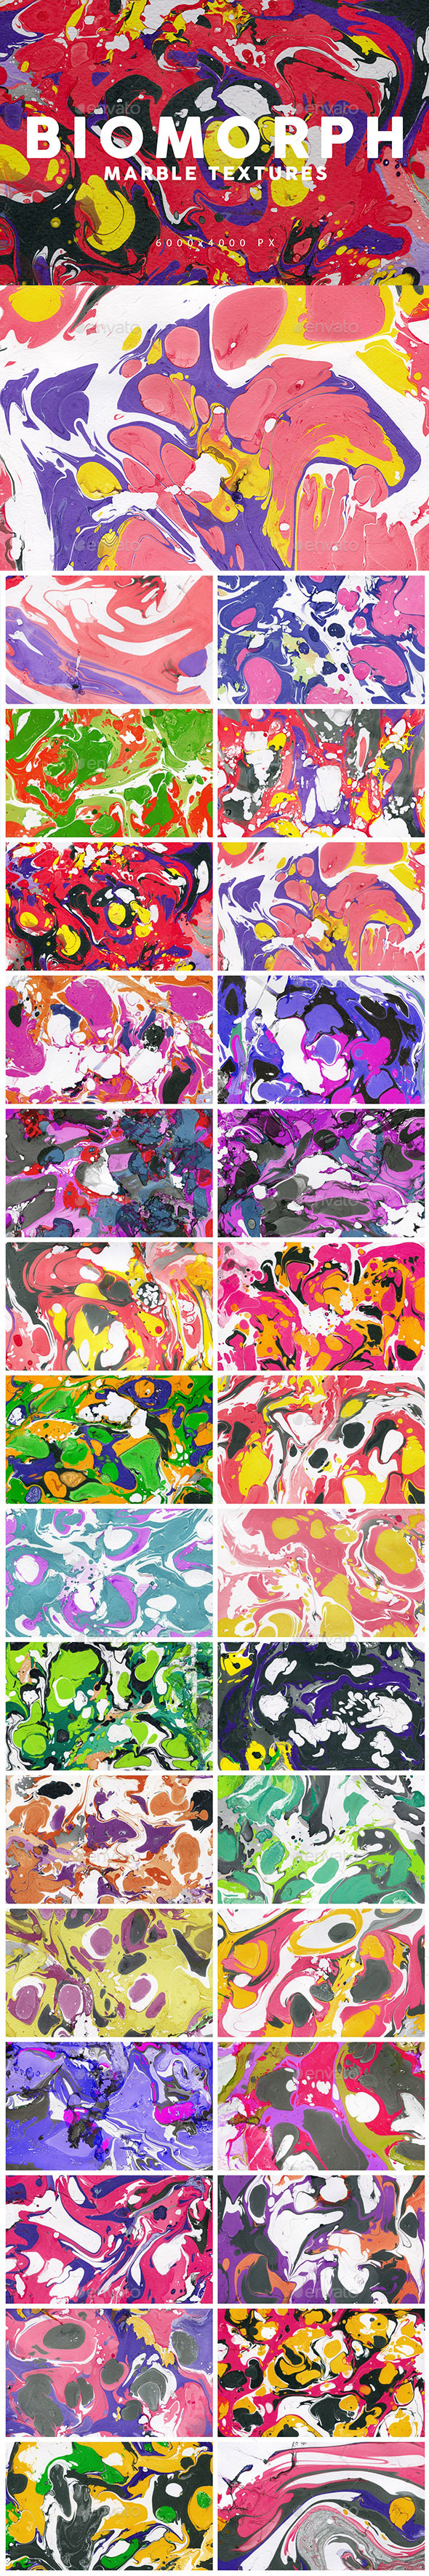 Biomorphic Marble Backgrounds 2